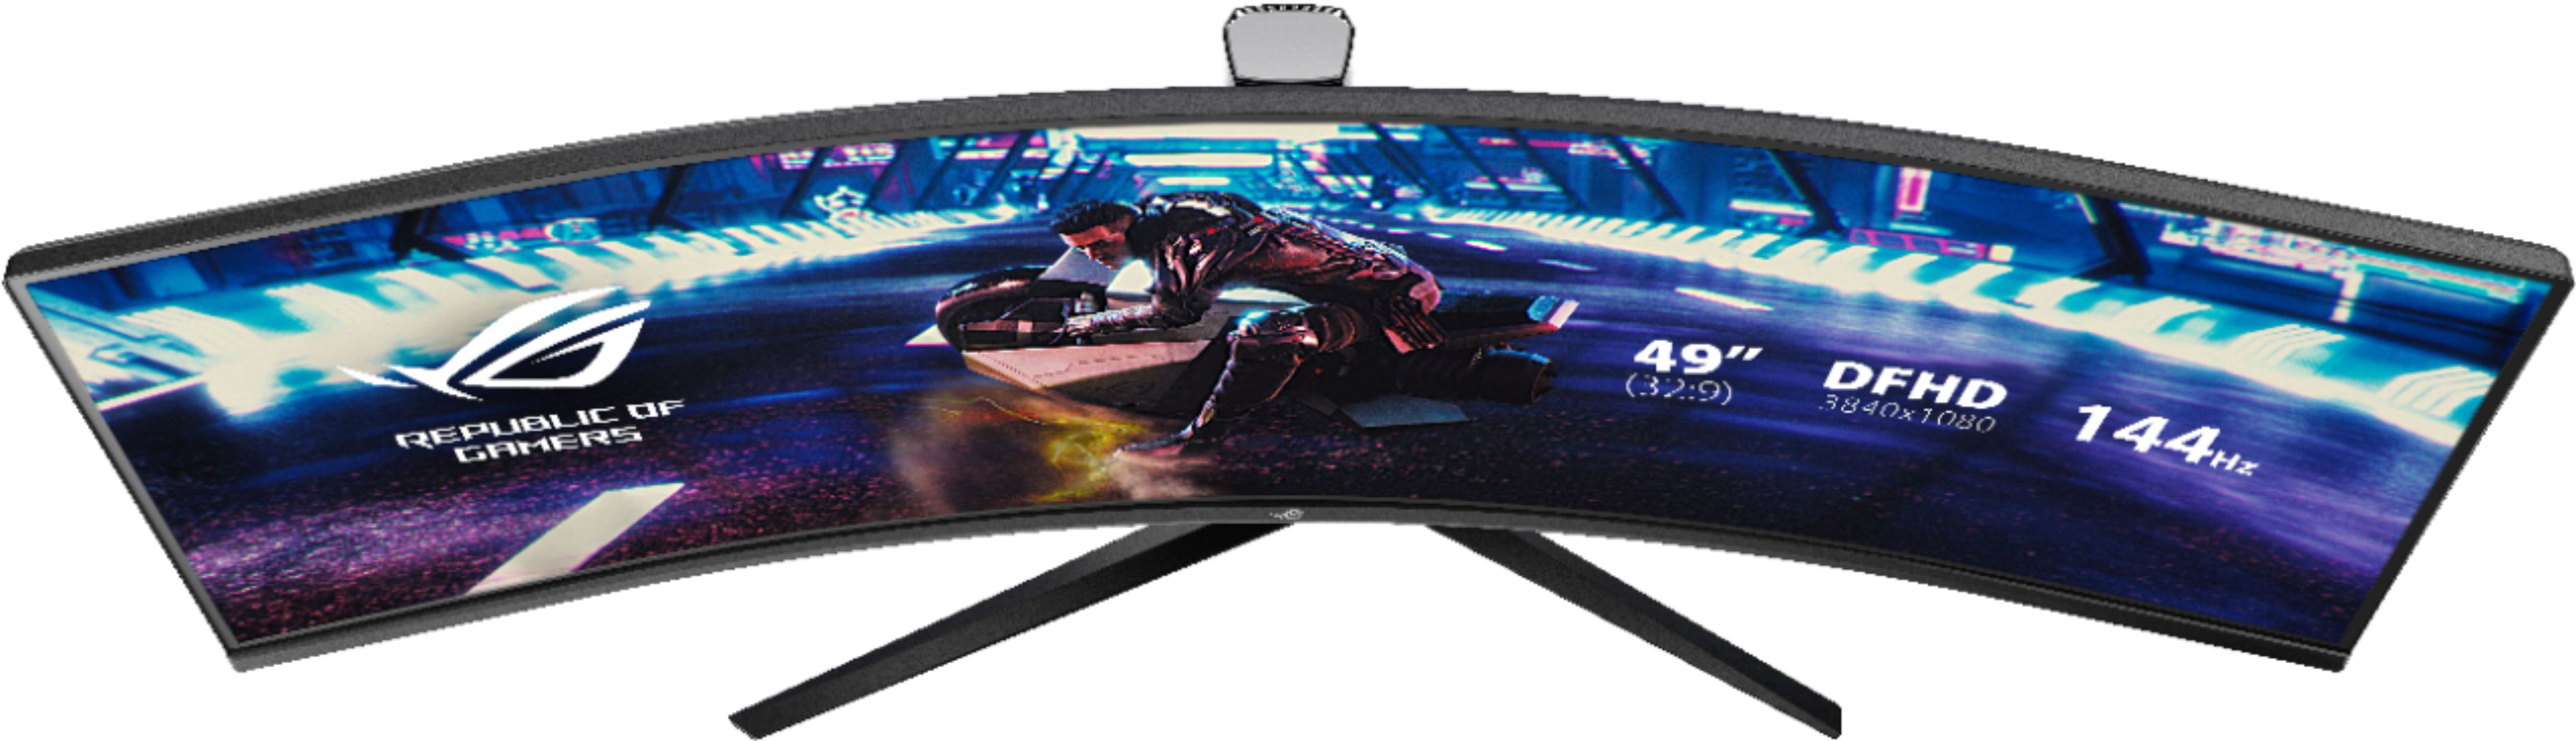 Best Buy: ASUS ROG Strix 49” Curved FHD 144Hz FreeSync Gaming 